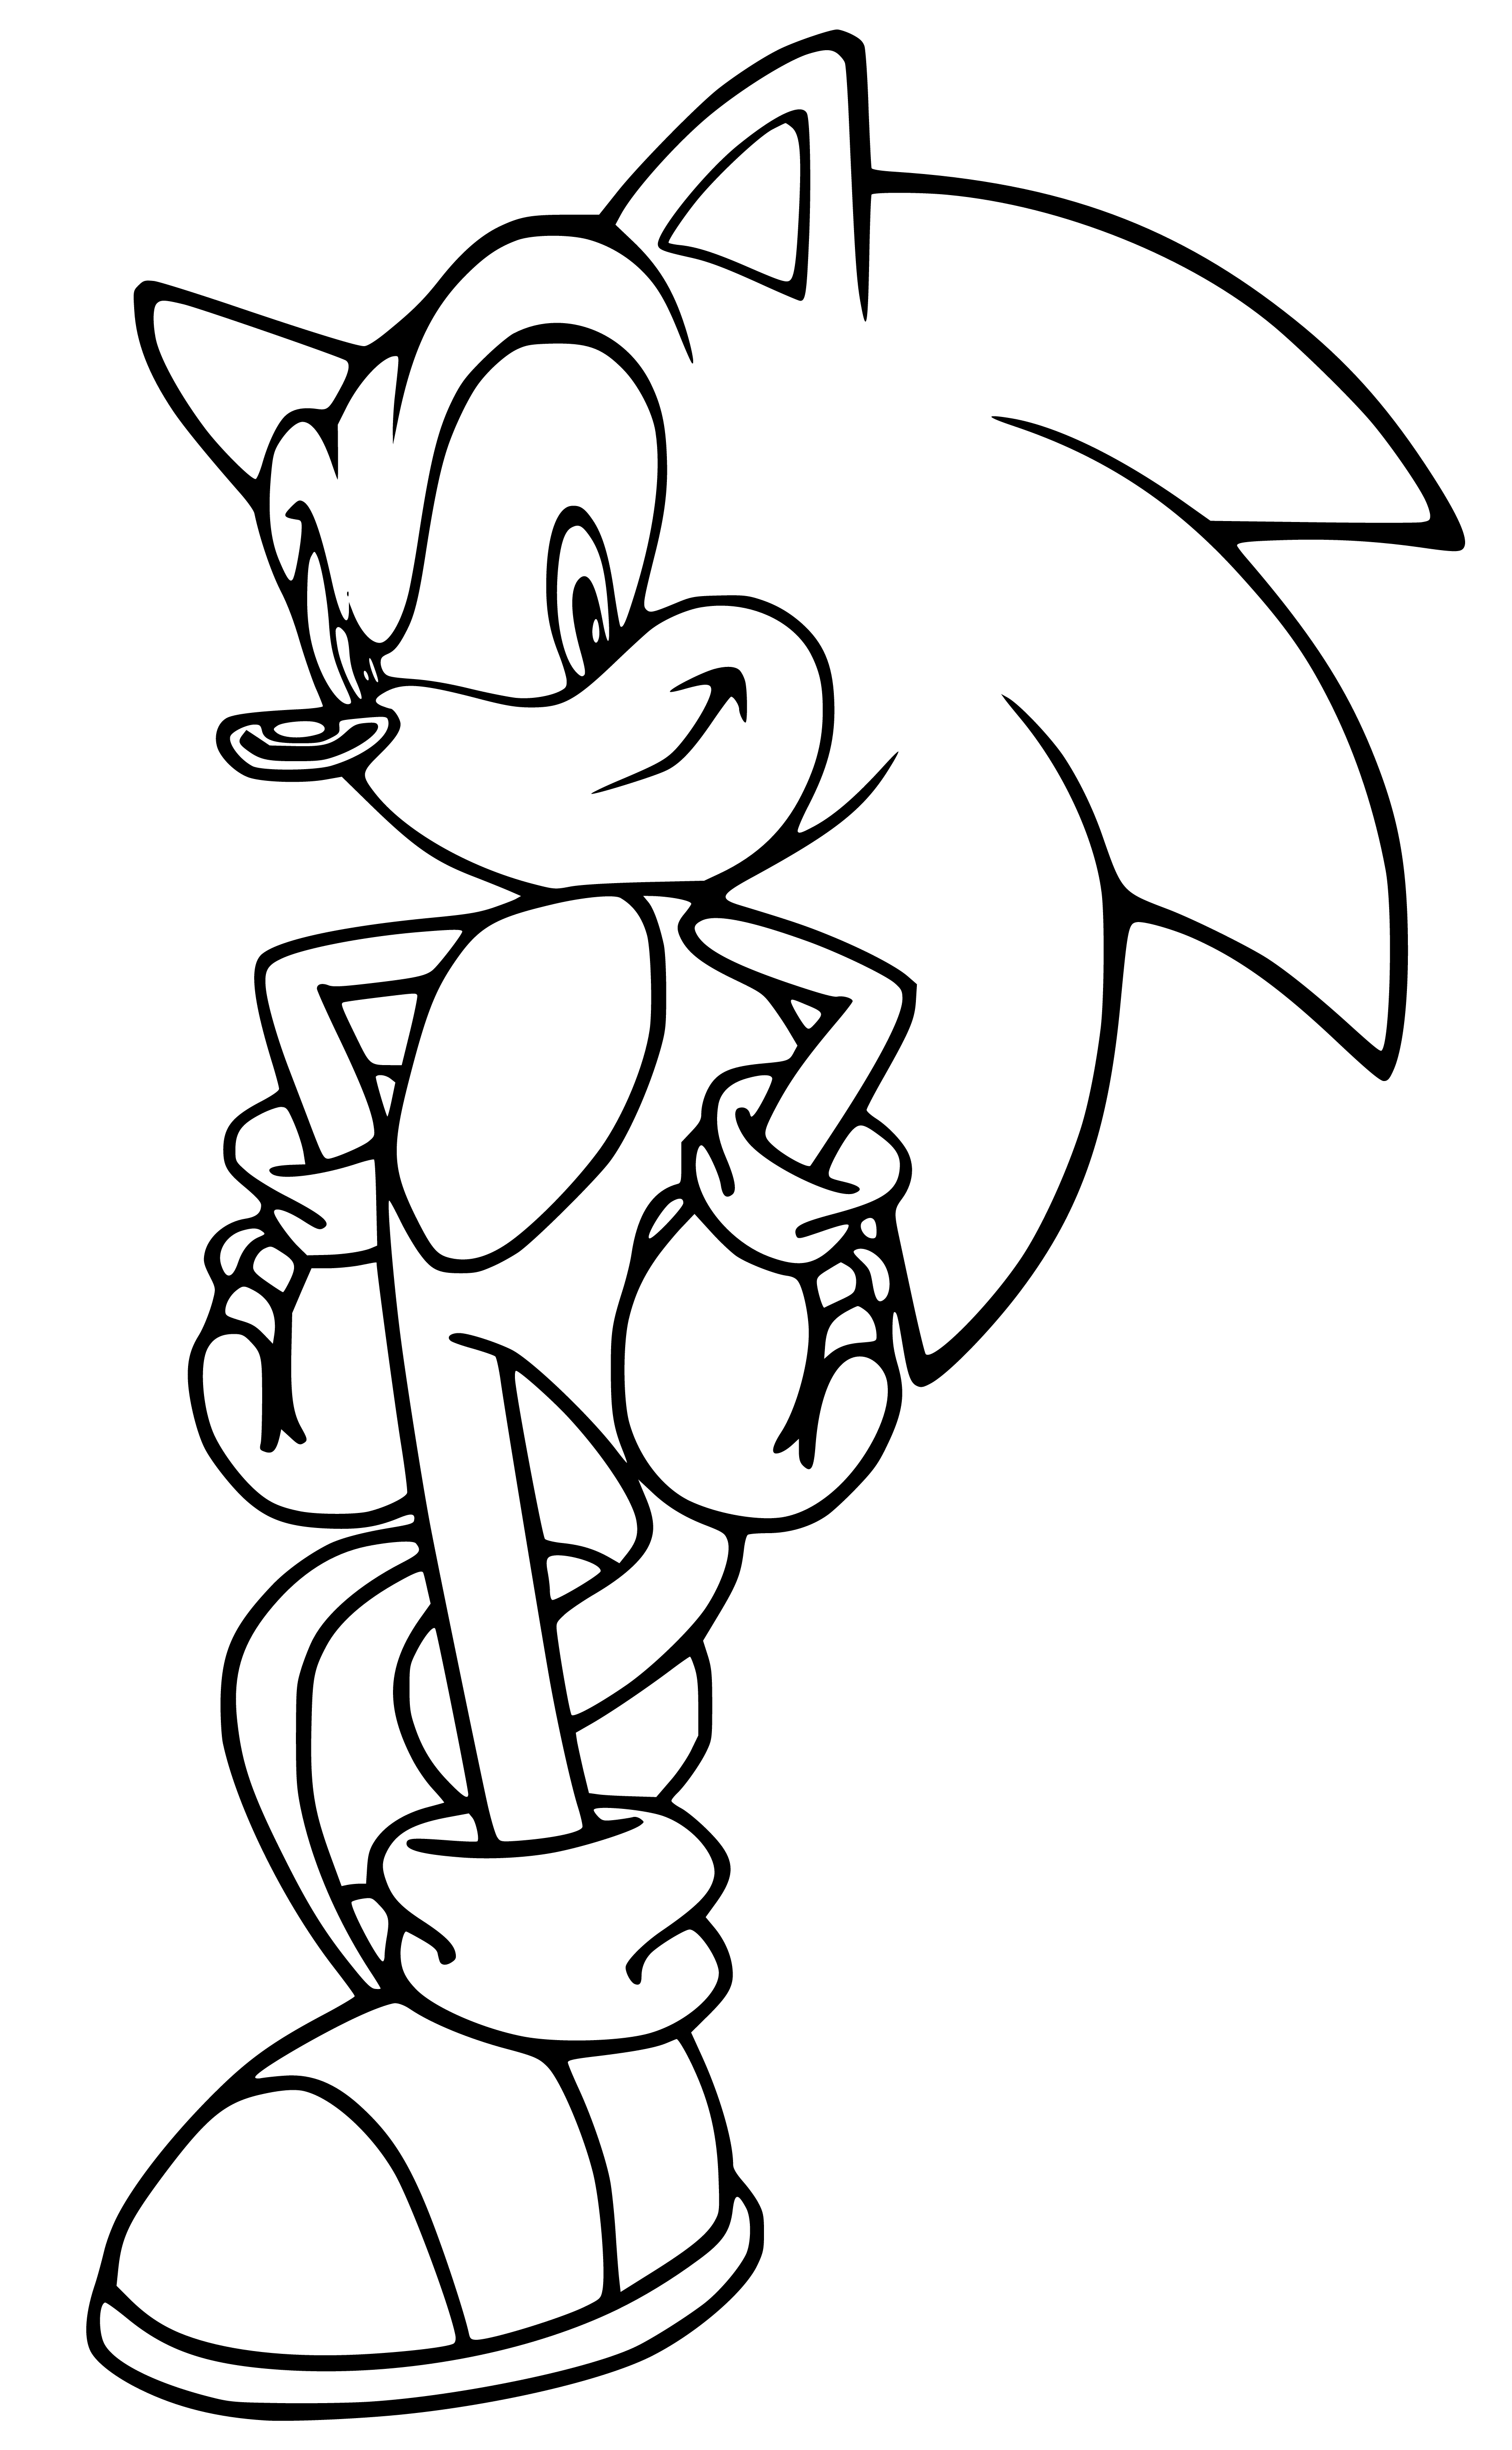 Printable Cute Sonic the Hedgehog Coloring Page for kids.